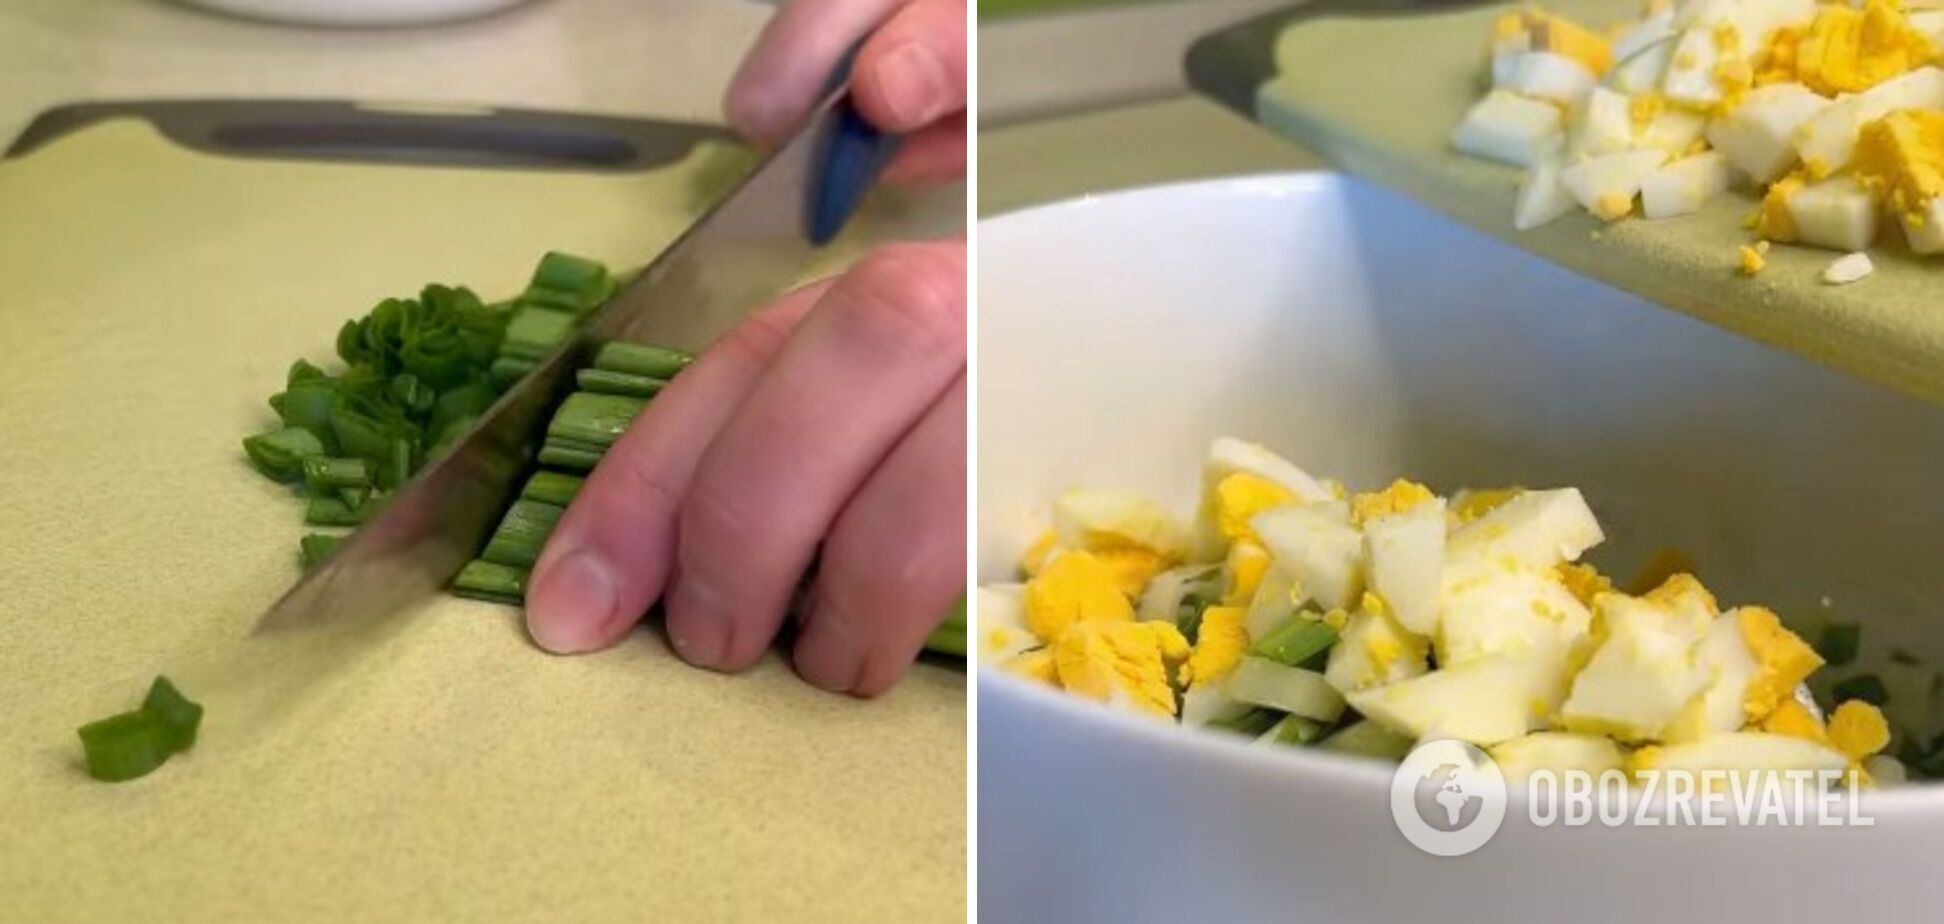 Preparing a salad with green onions